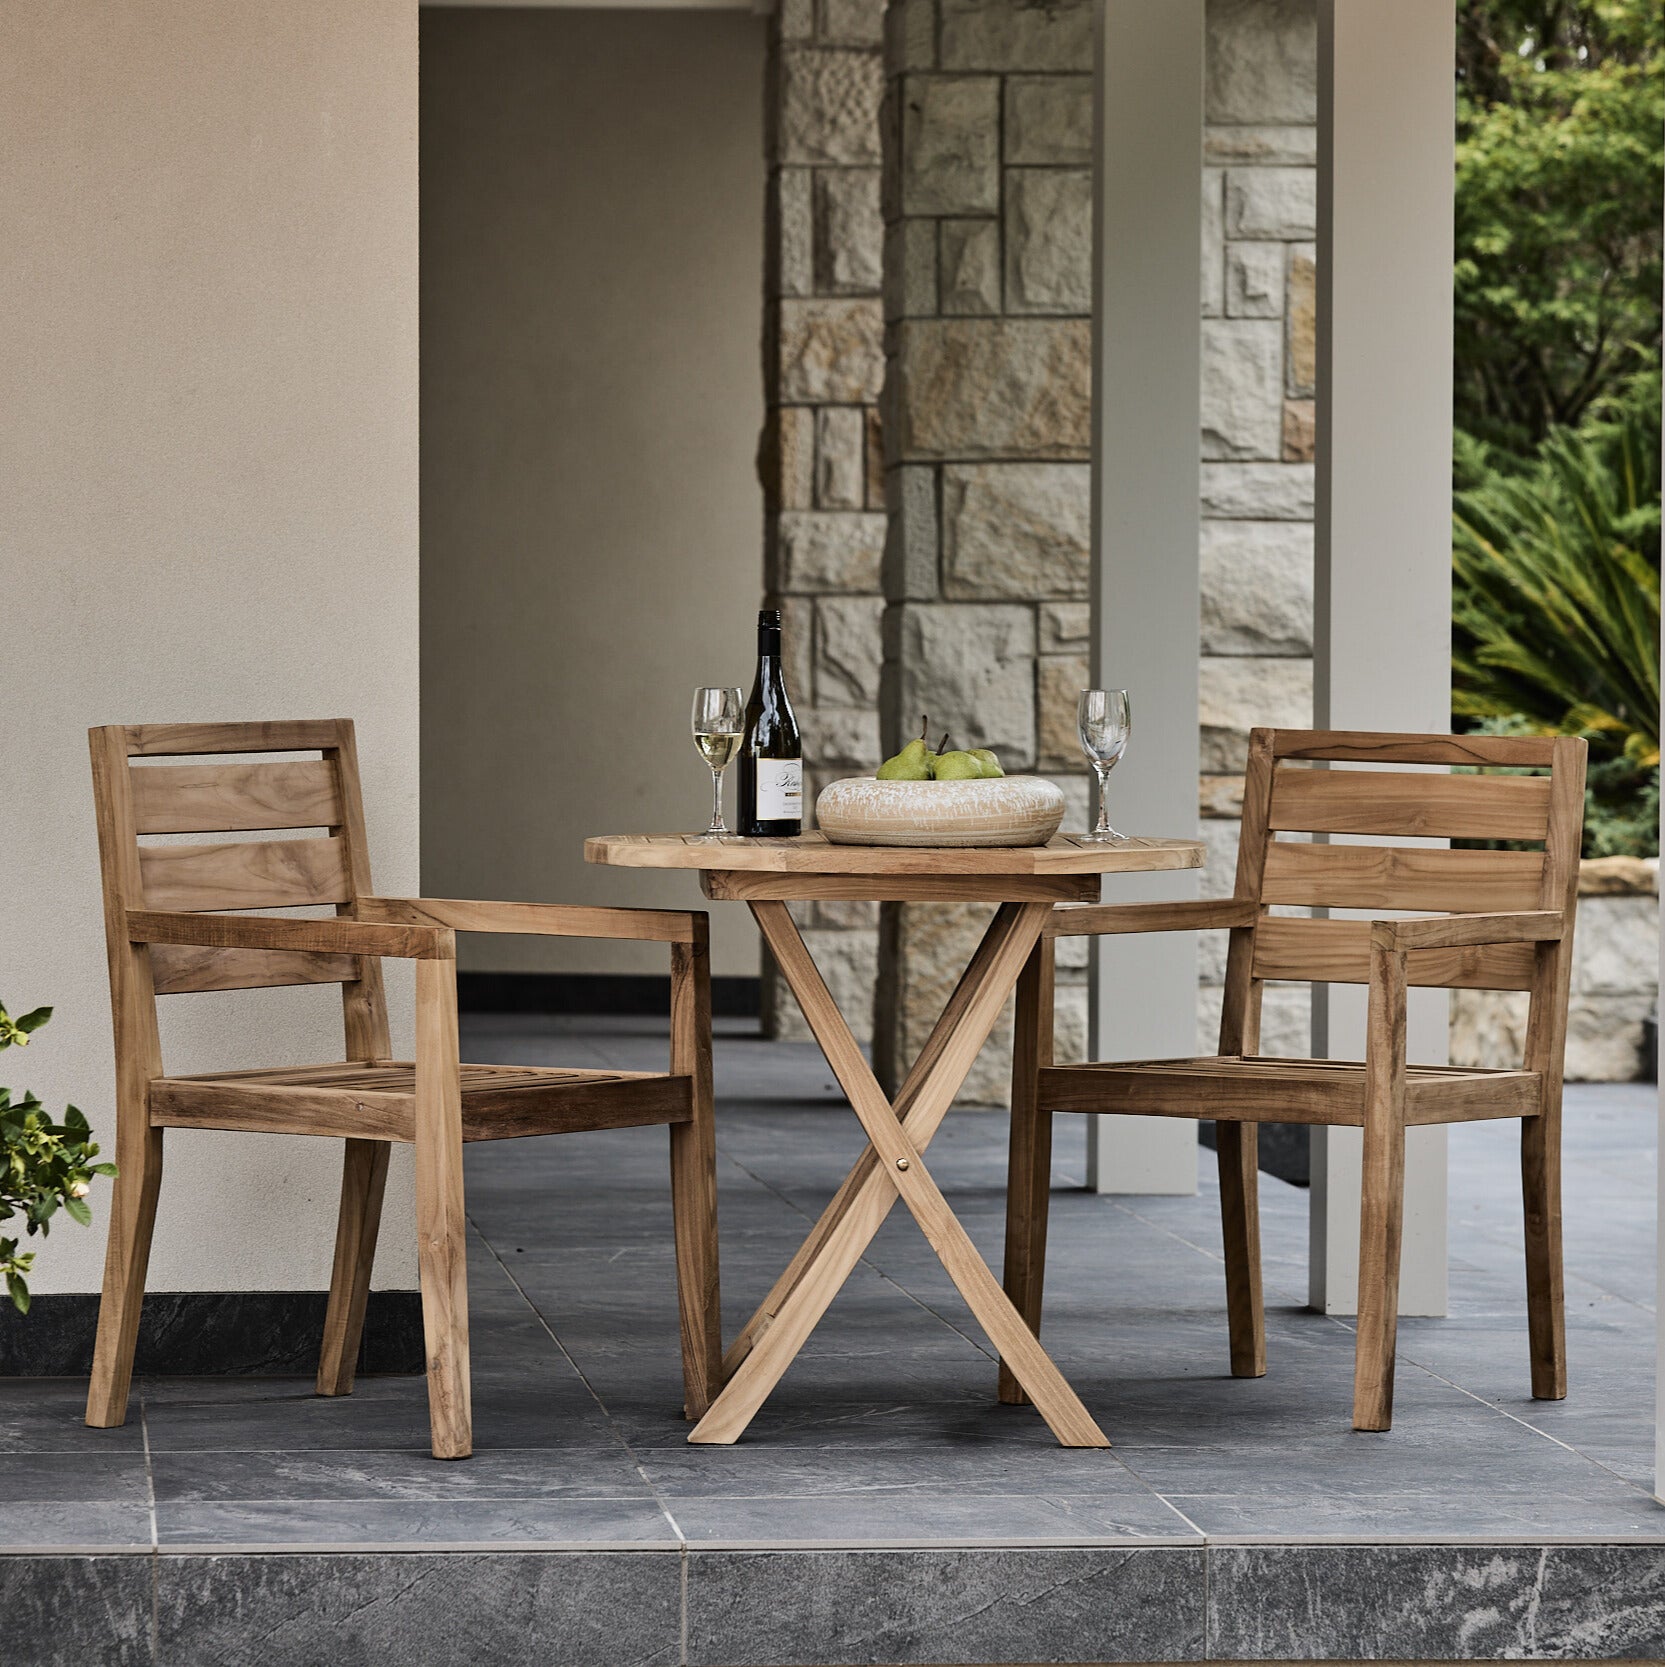 teak 3 piece bistro setting with arm chairs